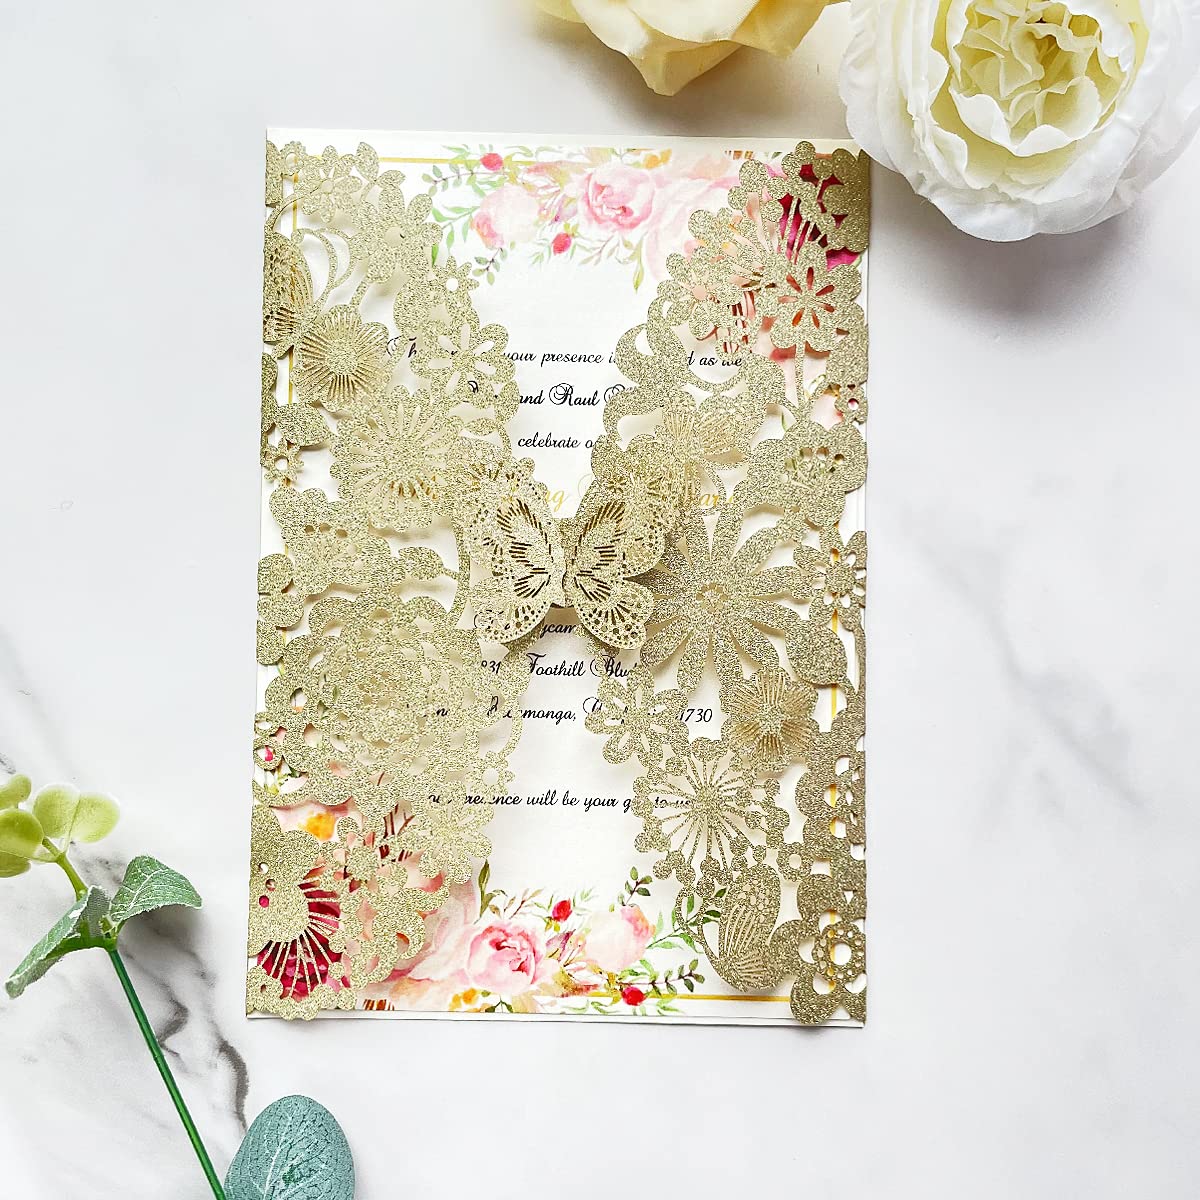 Hosmsua 5''x7.3'' 50pcs Champagne Laser Cut Flora Wedding Invitation Cards with Butterfly and Envelopes for Quinceañera Bridal Shower Wedding invite (Champagne Glitter) light gold